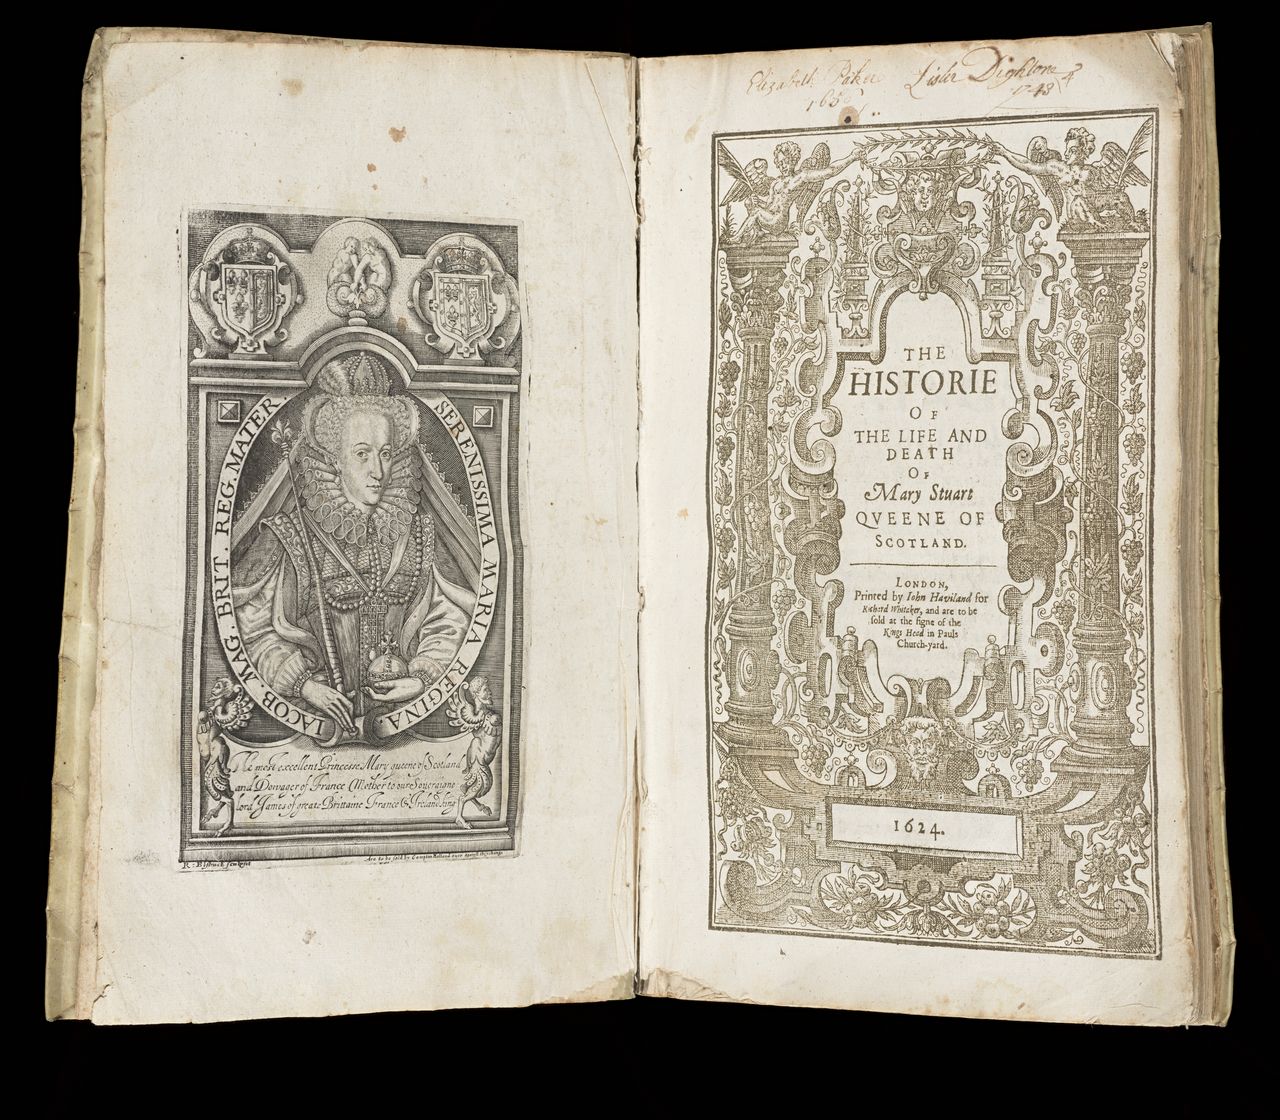 William Camden, <em>The historie of the life and death of Mary Stuart, Queene of Scotland</em>, London, printed by Iohn Haviland for Richard Whitaker, and are to be sold at the signe of the Kings Head in Pauls Church-yard, 1624, State Library Victoria, Melbourne (RAREEMM 126/9)
